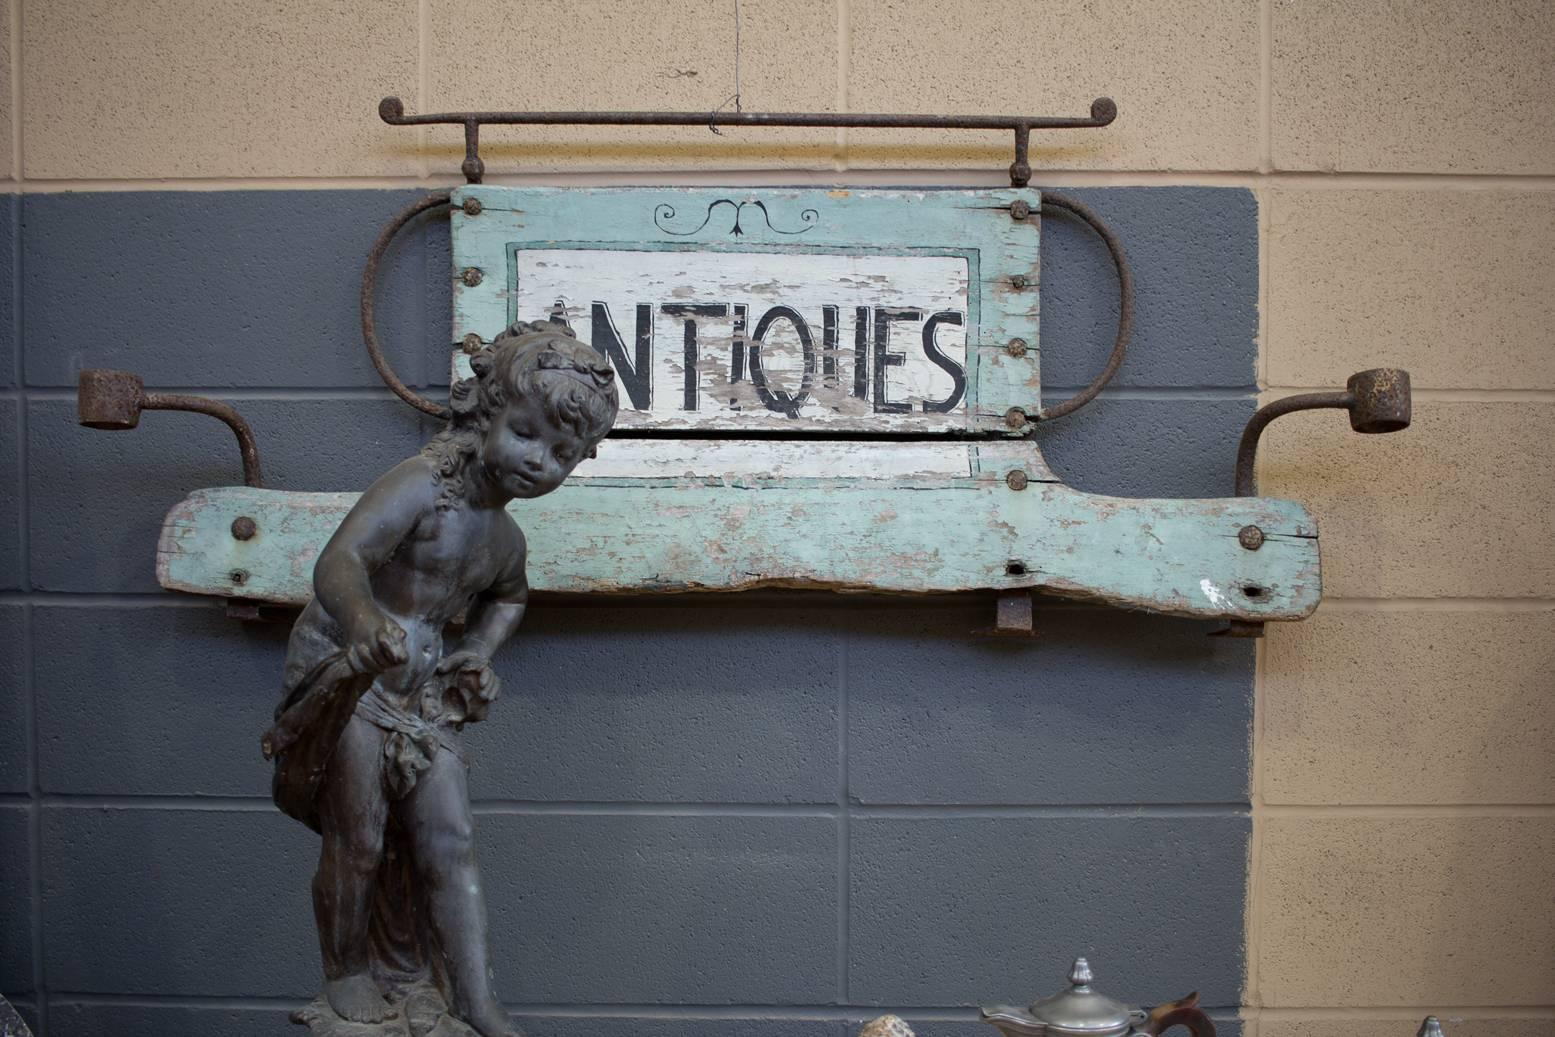 Folksy mercantile English antique sign in wrought iron frame with its original paint.